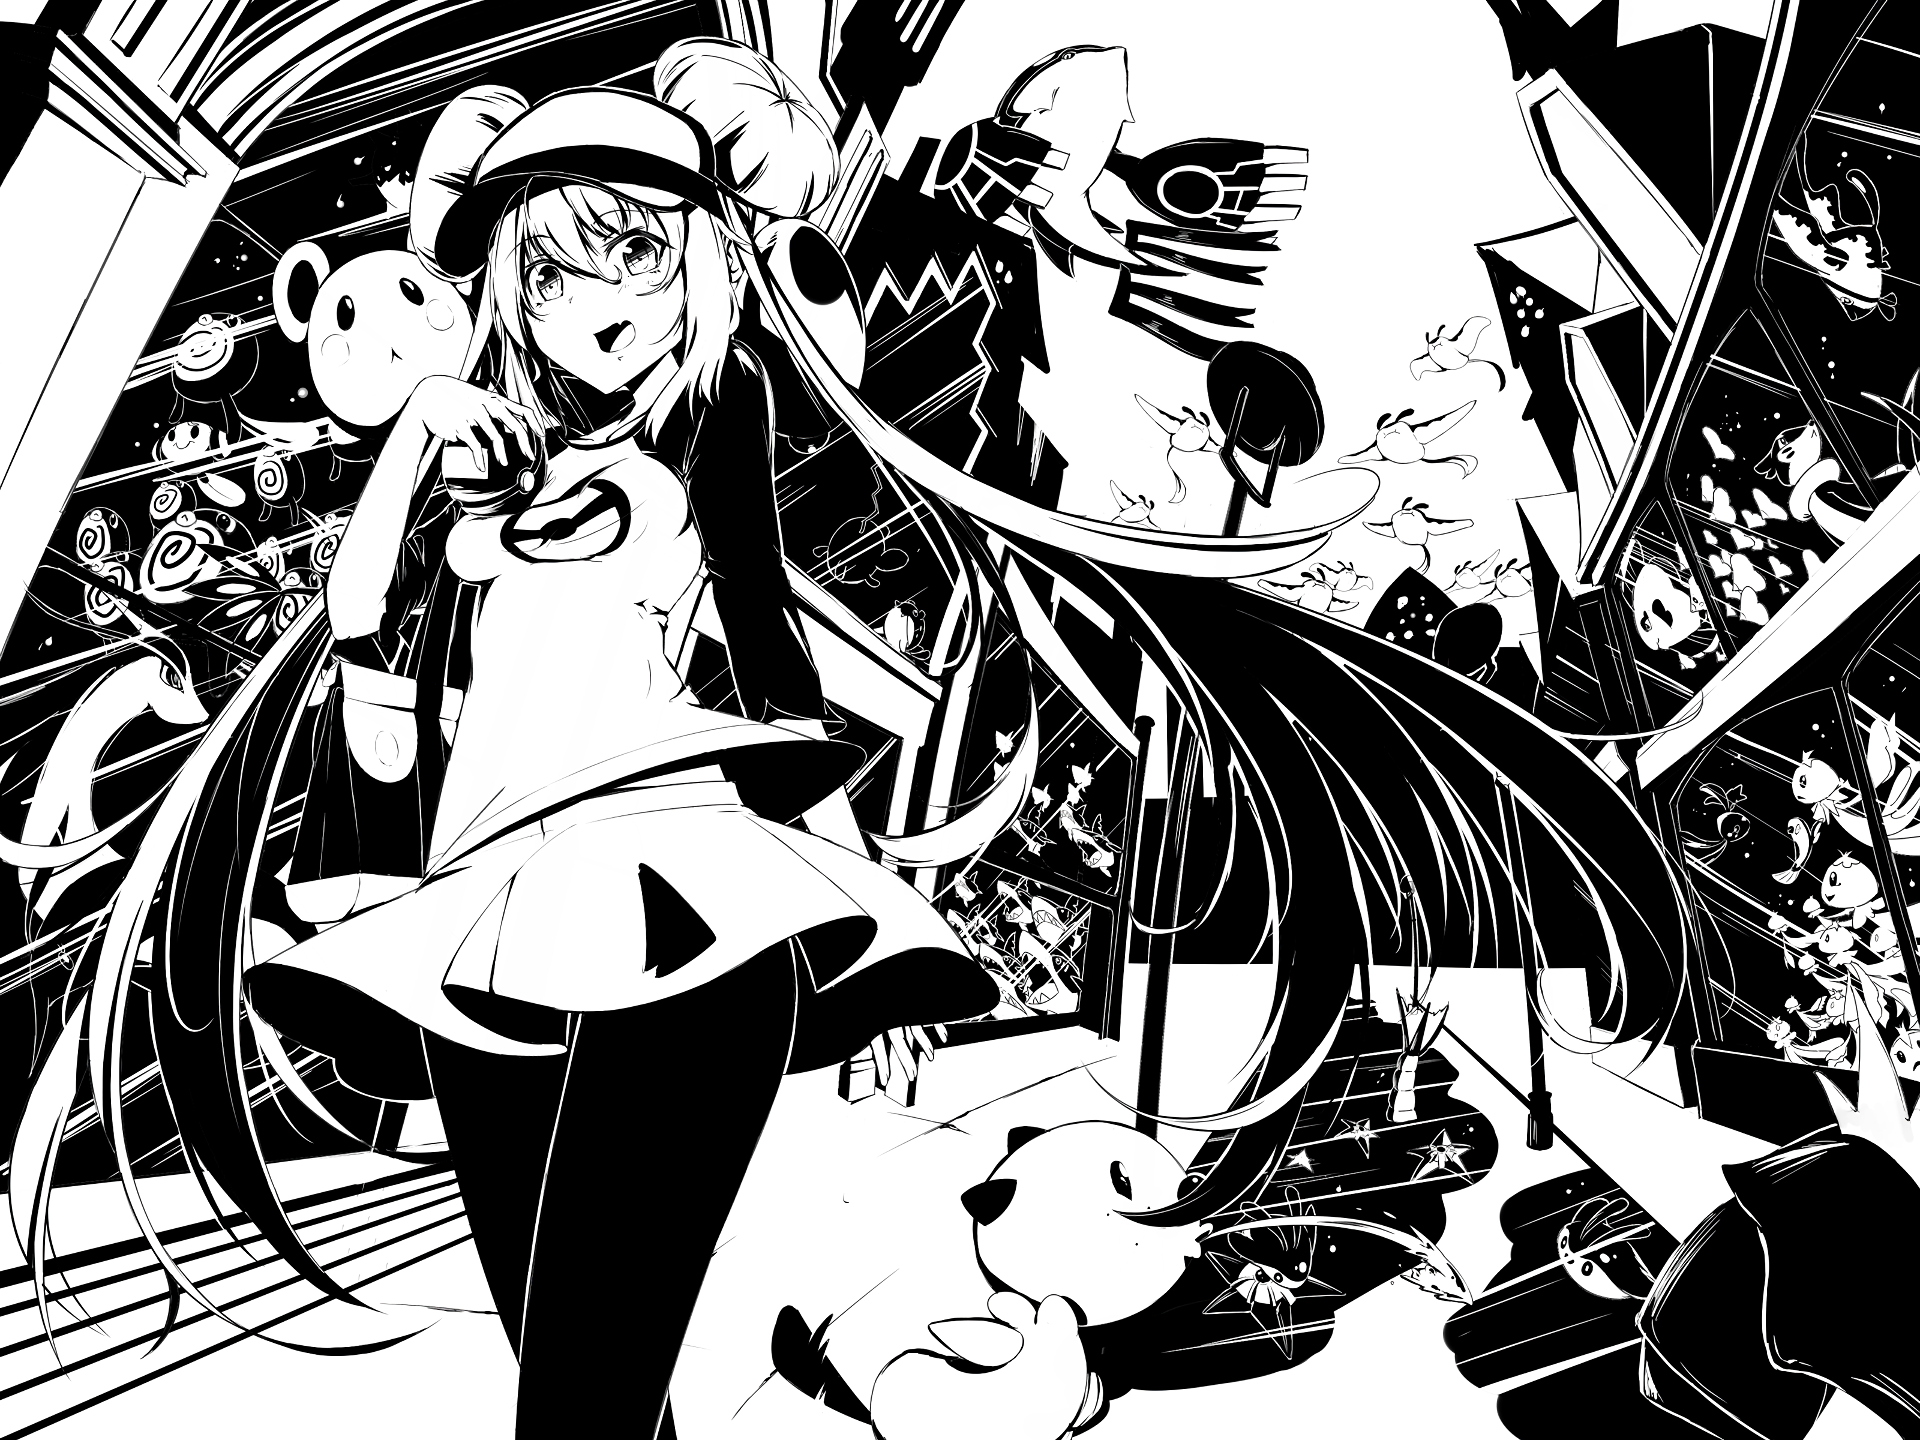 Video Game Pokemon: Black and White 2 HD Wallpaper | Background Image